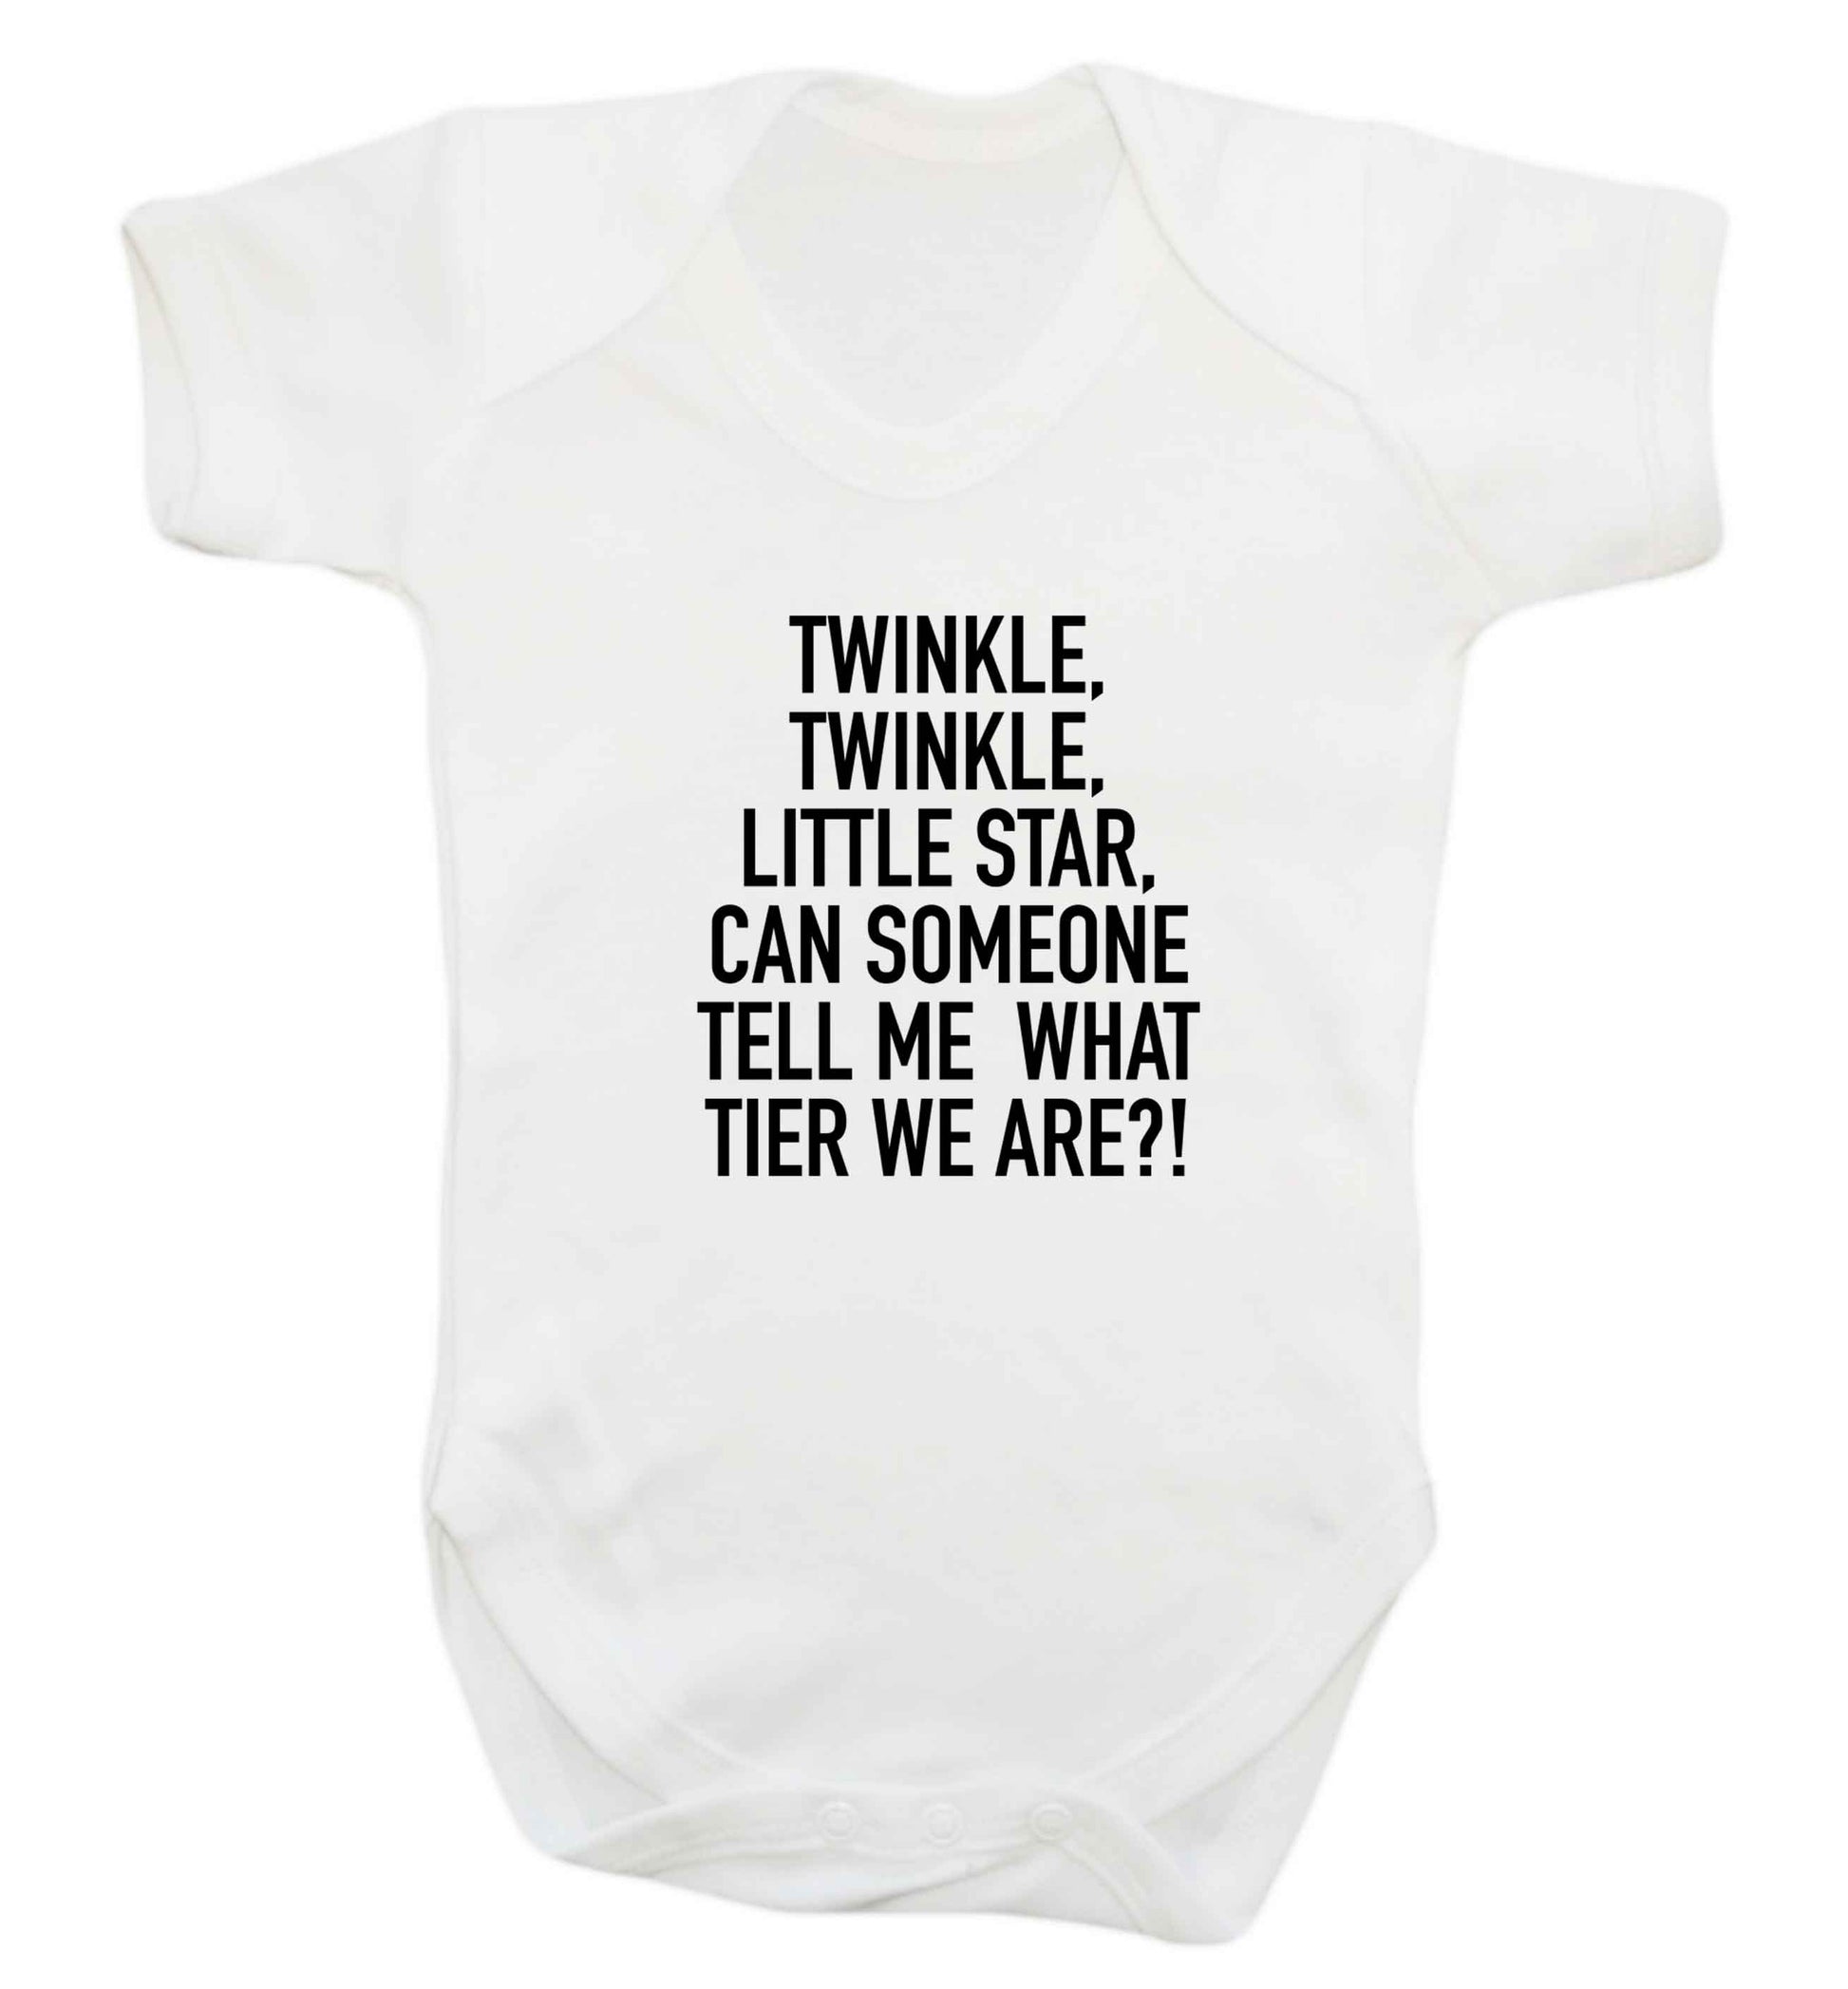 Twinkle twinkle, little star does anyone know what tier we are? baby vest white 18-24 months